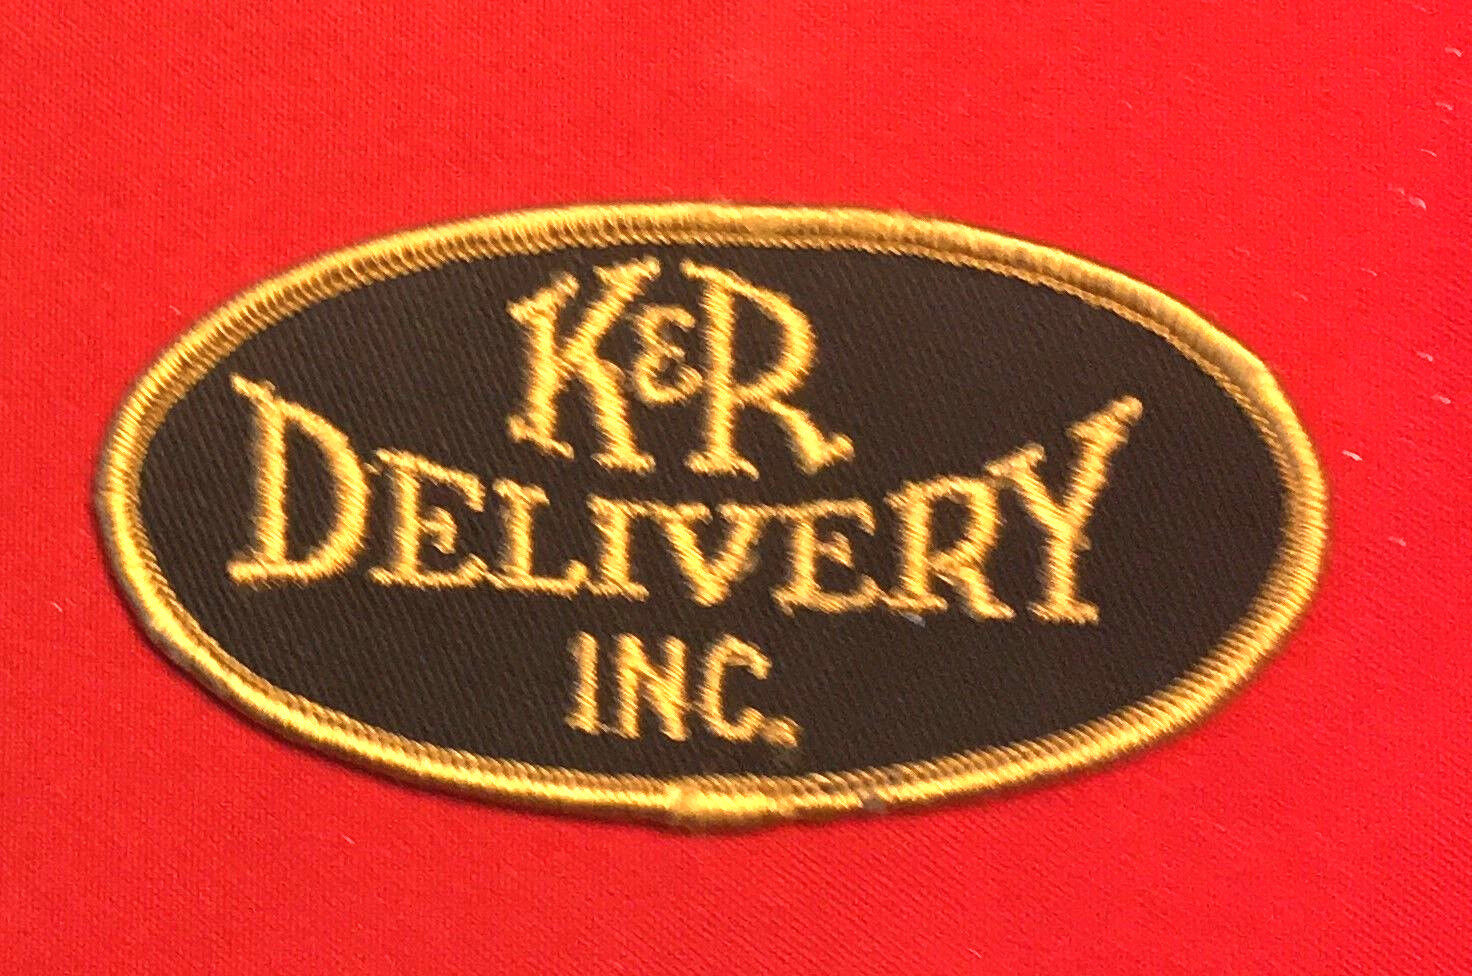 K & R Delivery Inc driver patch 2 X 4 #3069